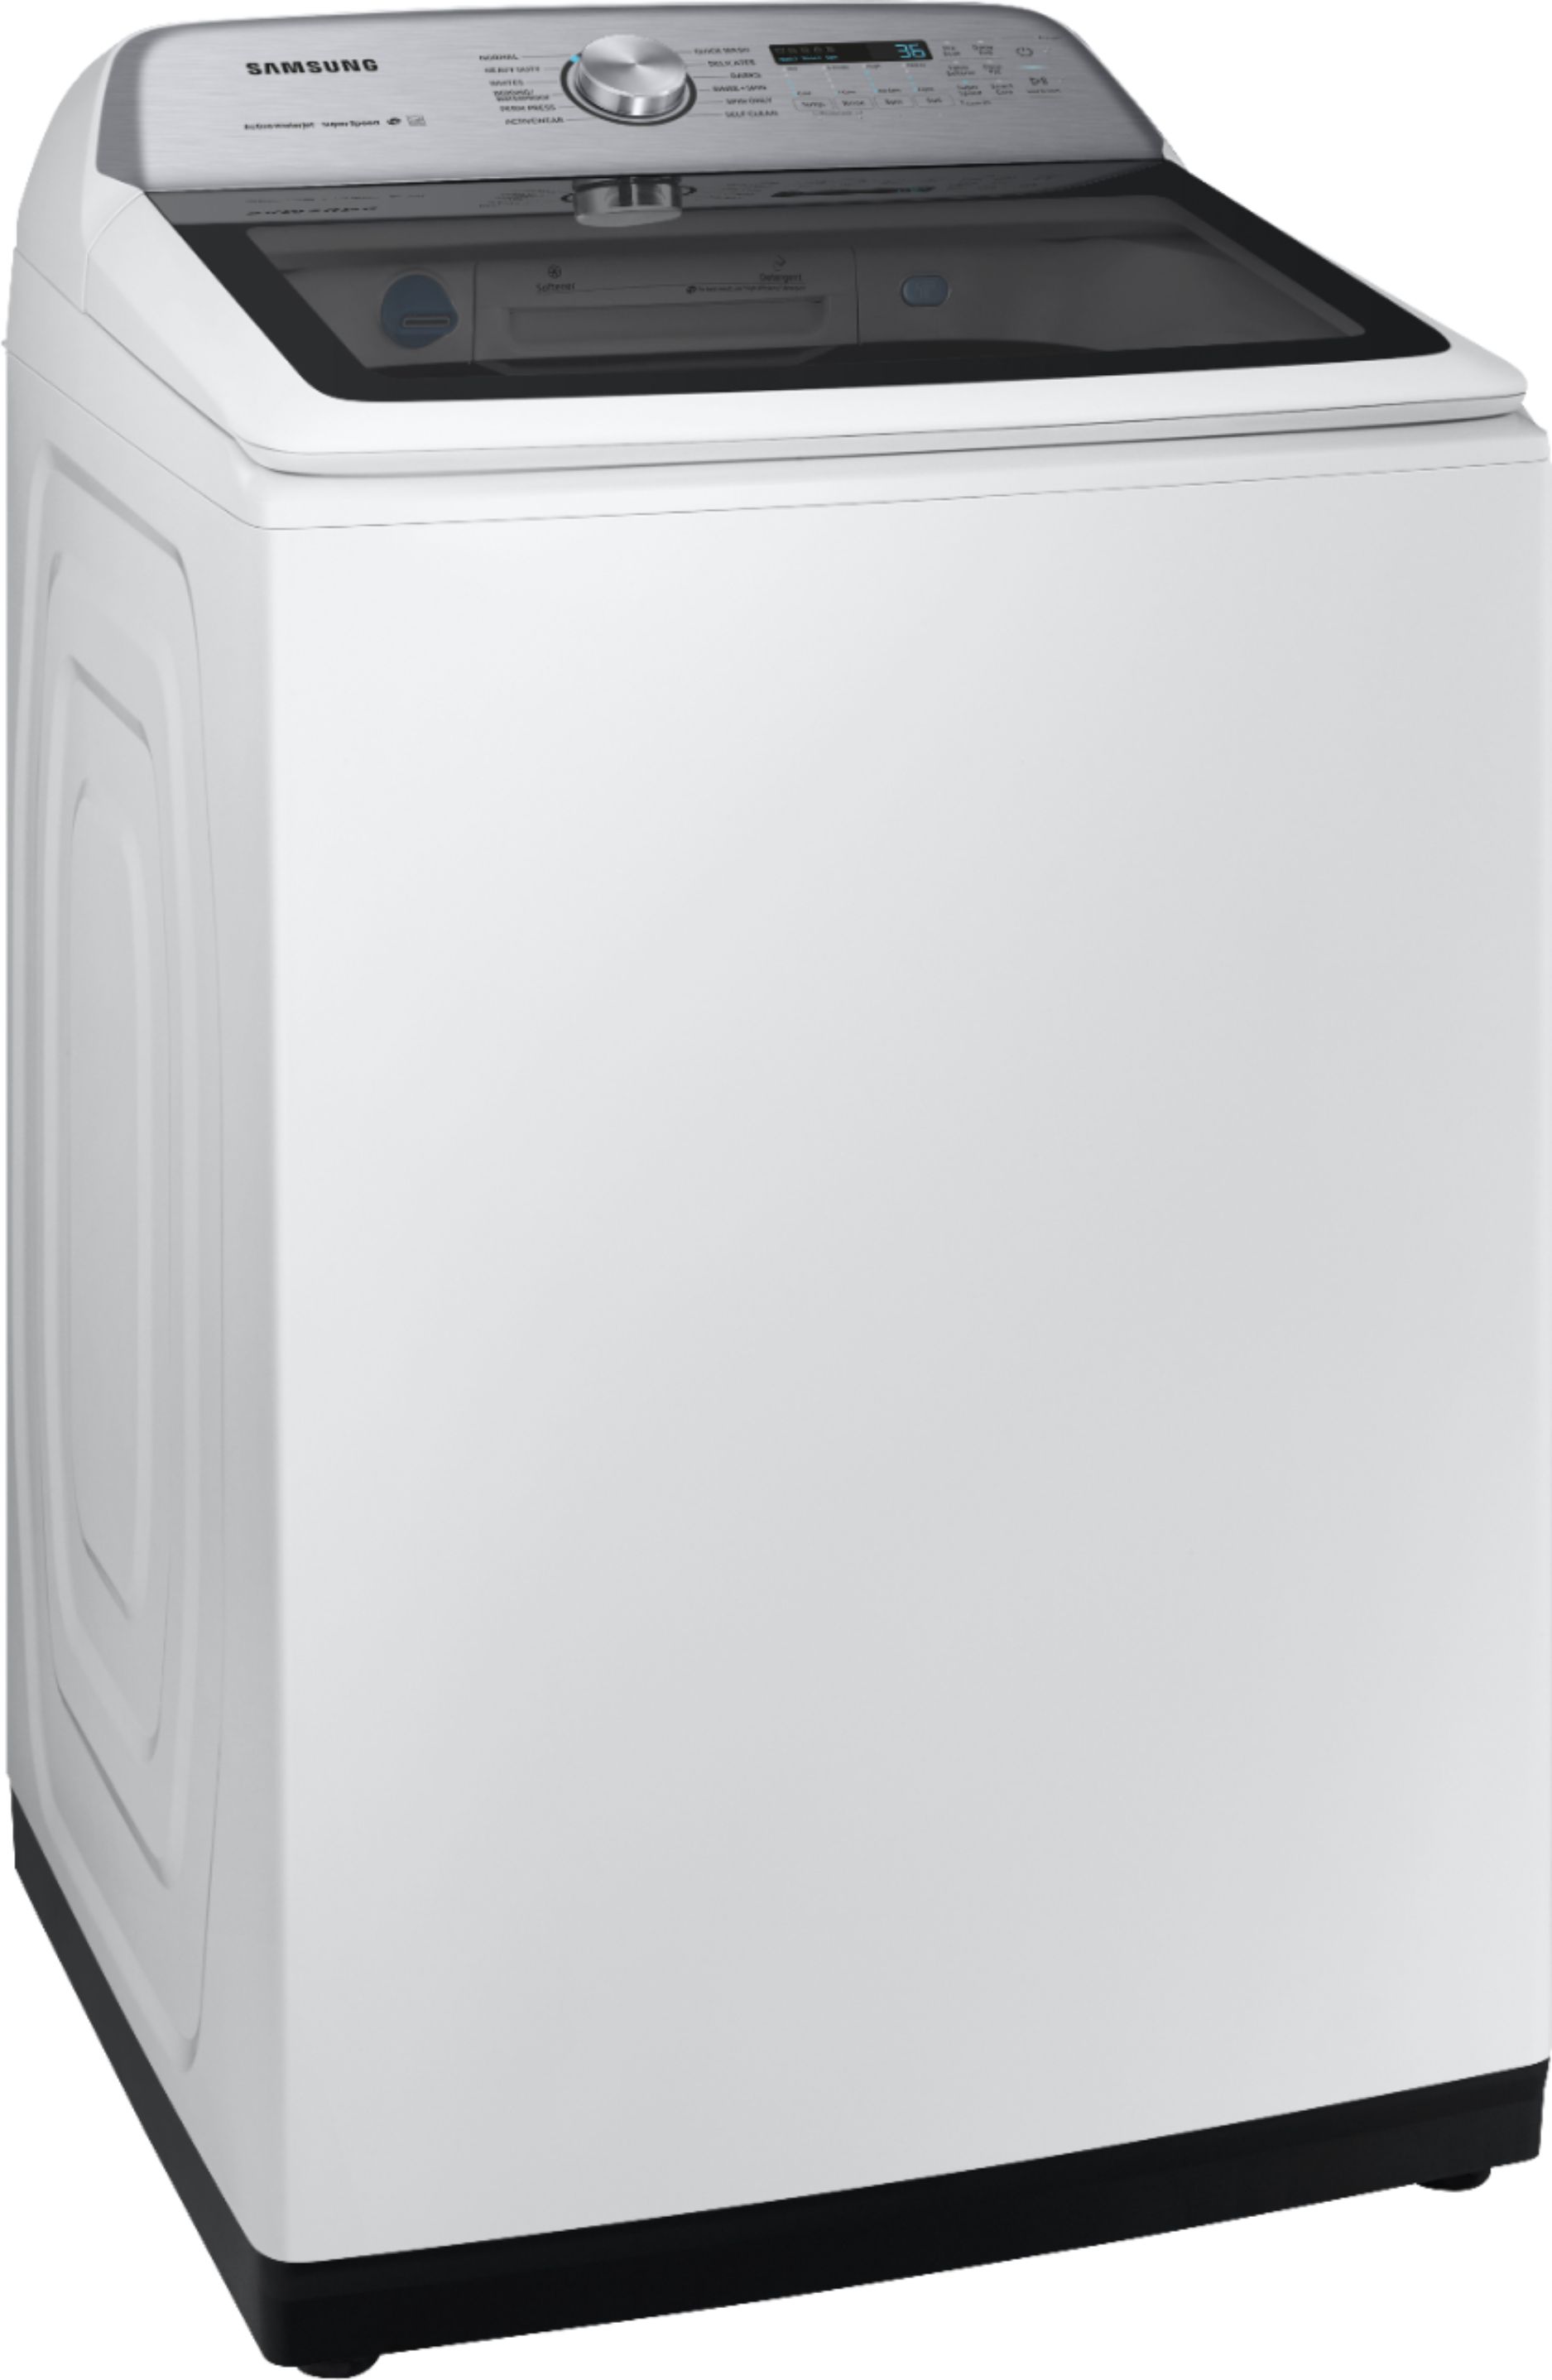 Angle View: Samsung - 5.0 Cu. Ft. High-Efficiency Top Load Washer with Super Speed - White